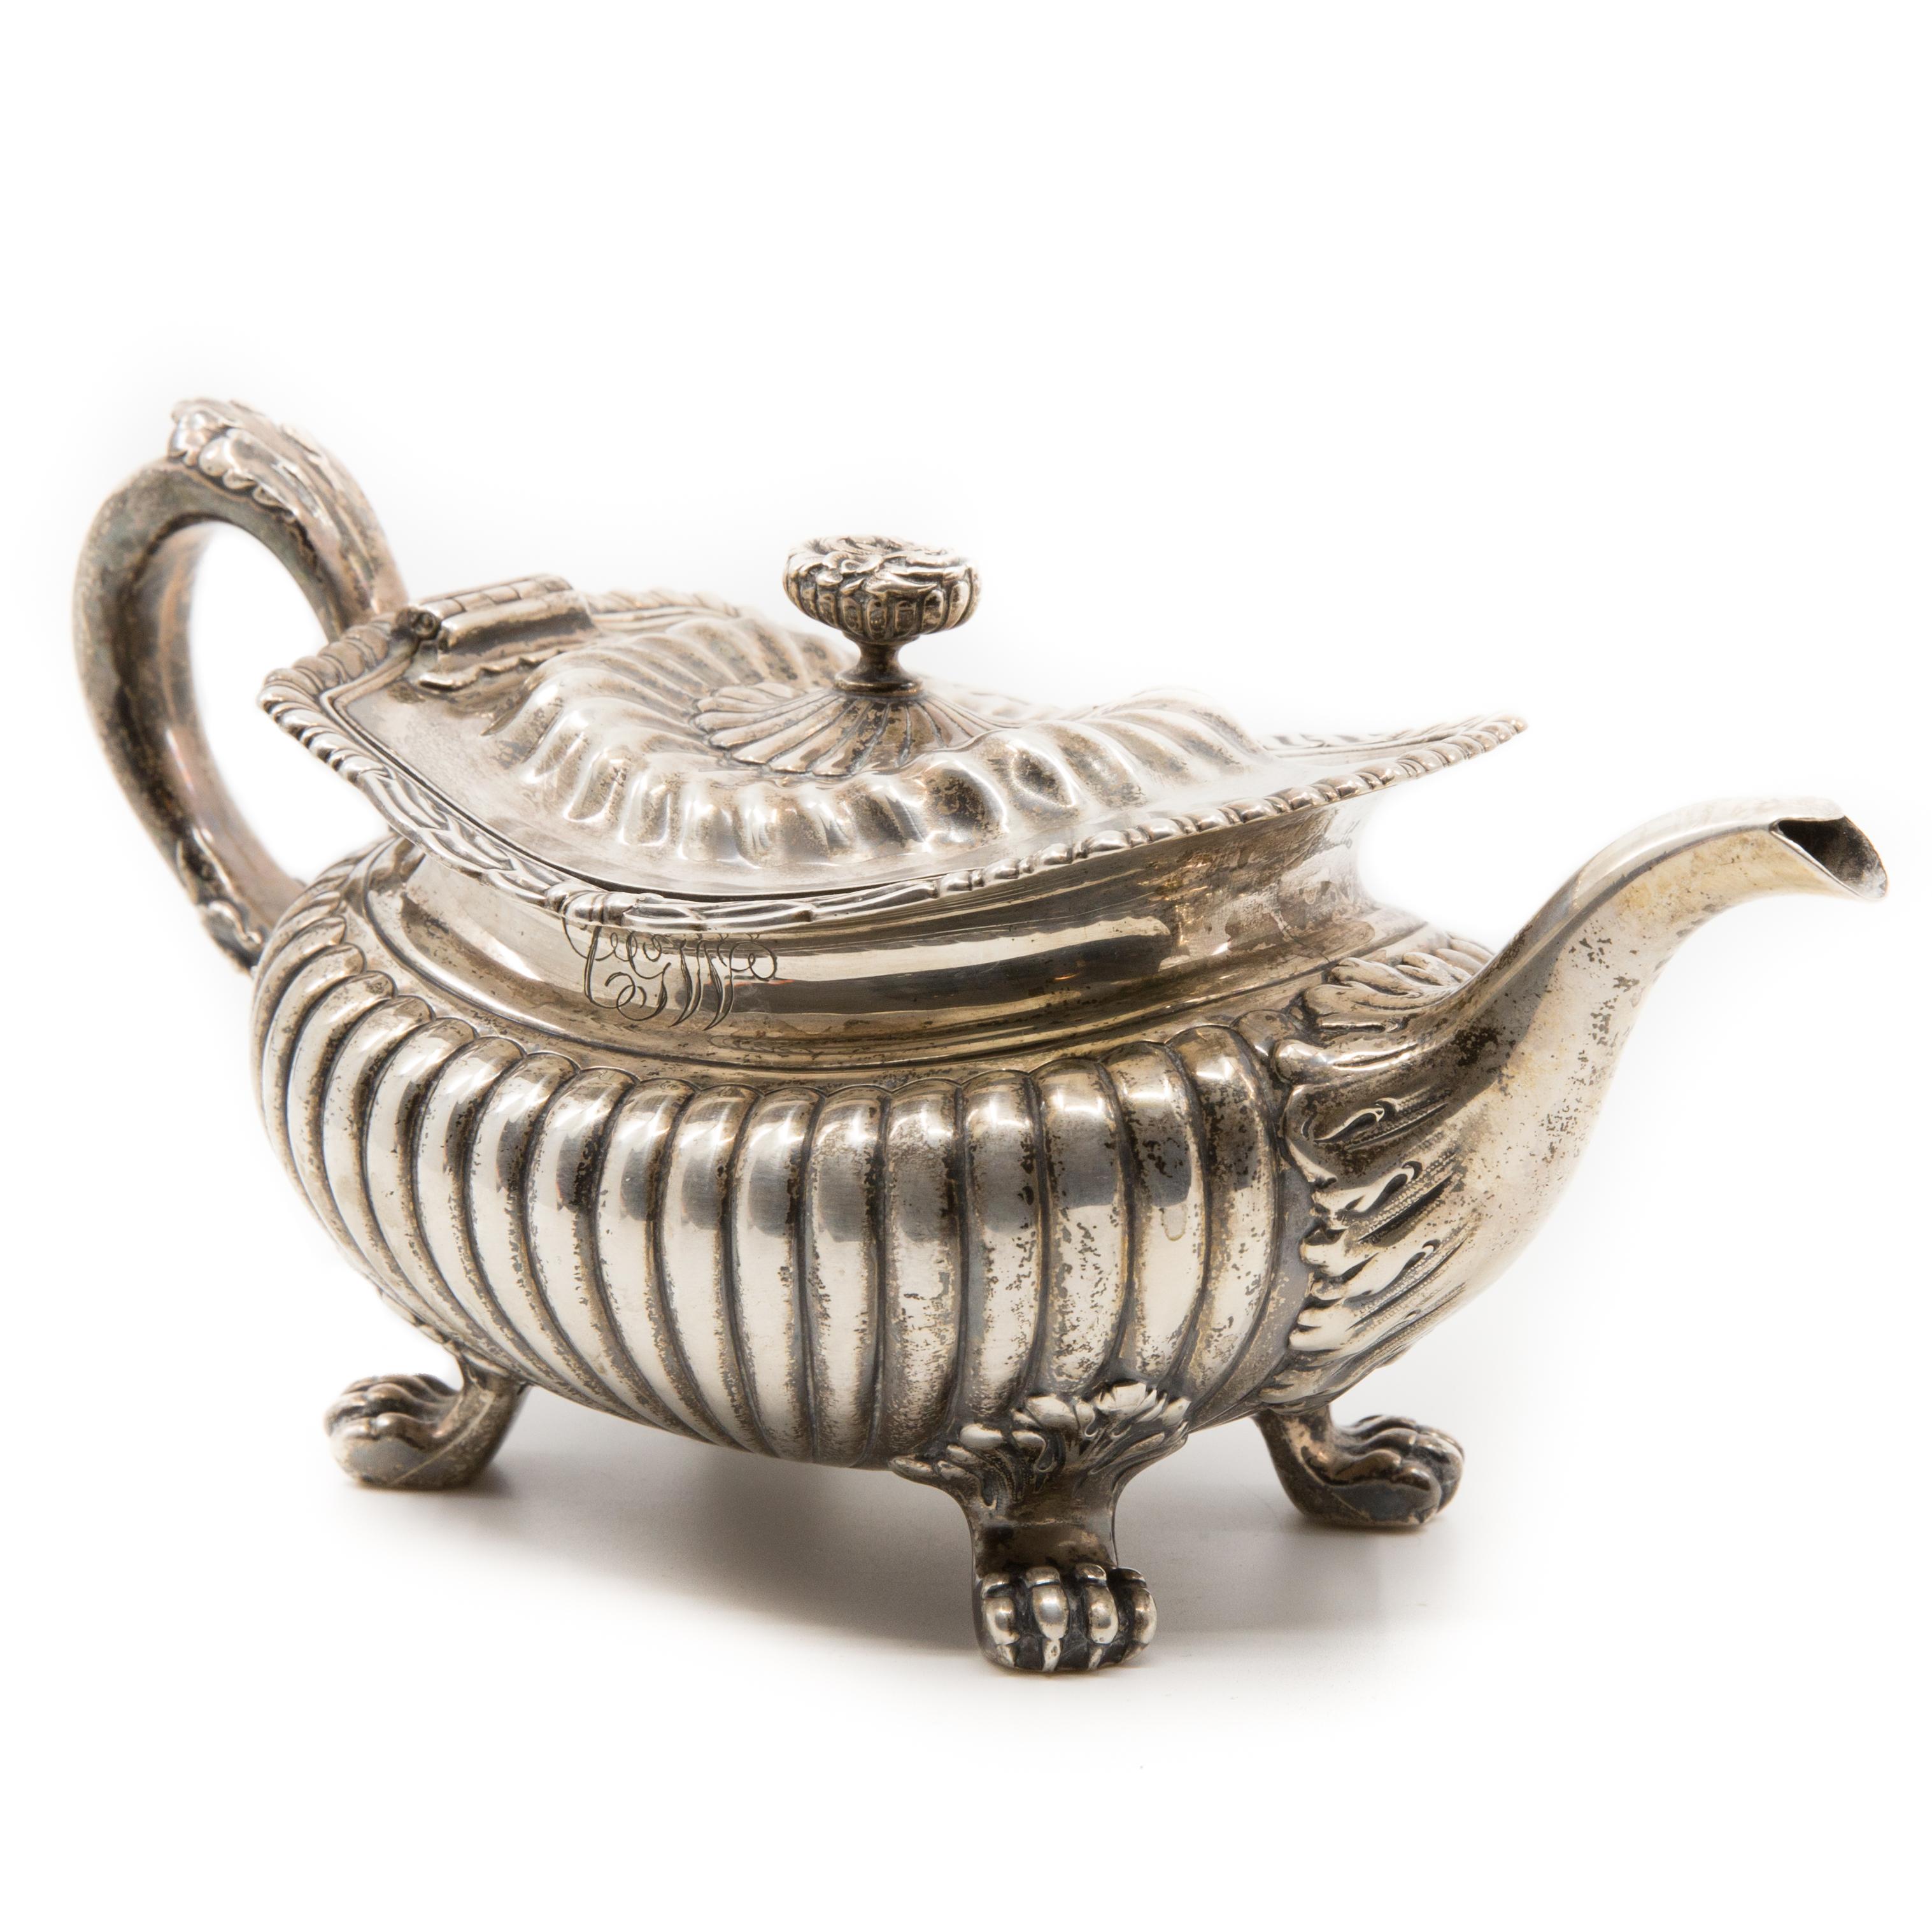 Offered is a vintage 19th century signed and numbered footed sterling silver Georgian style American teapot. The bottom reads as follows: Sterling/ 515/ 1 Pint/ 925/1000 Fine. The side bears the initials CGW and measures approximately 4.5” H x 9.5”